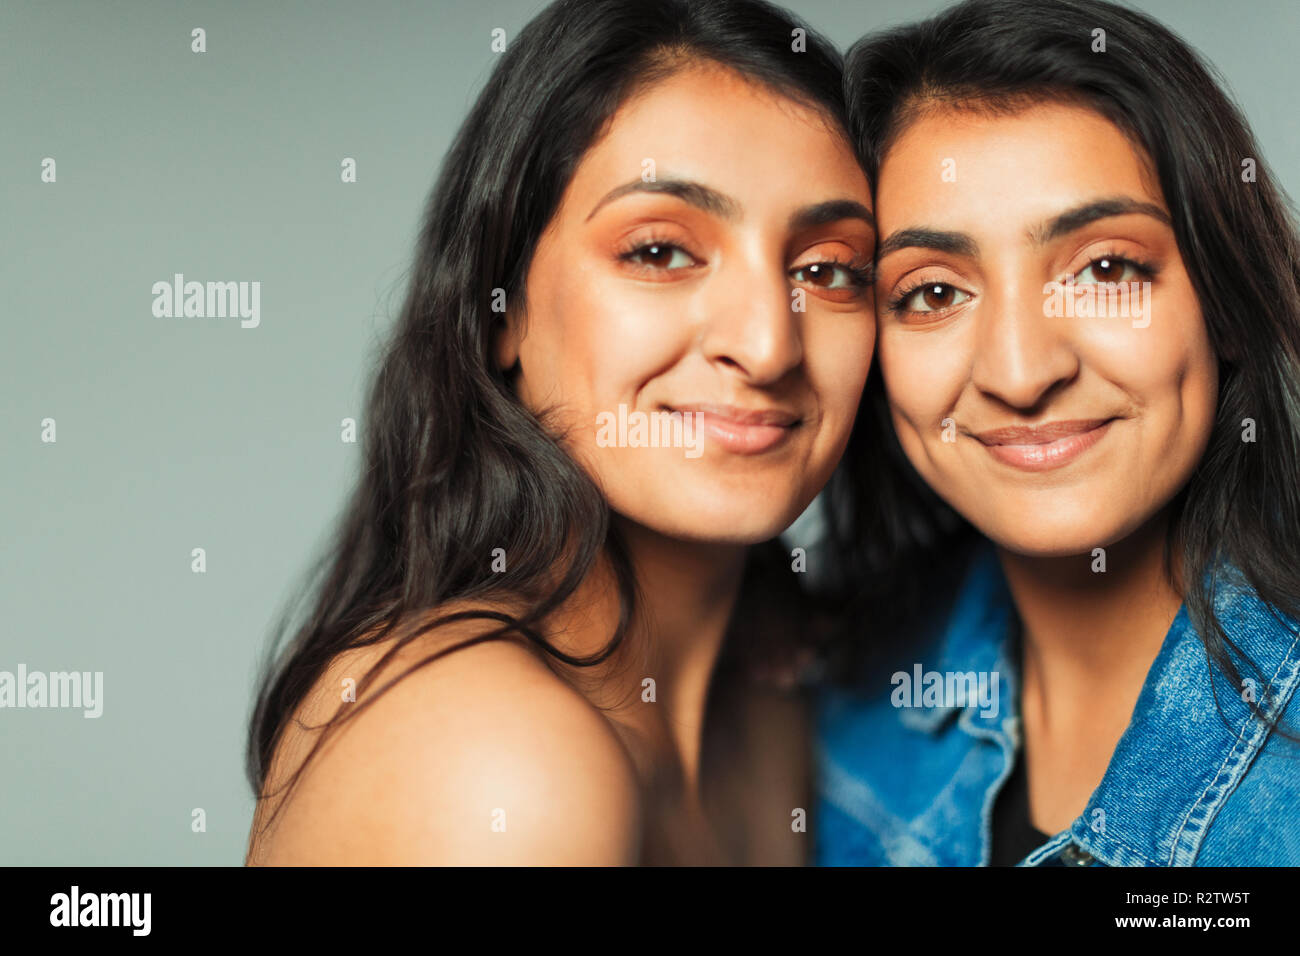 Portrait smiling, confident teenage twin sisters Stock Photo